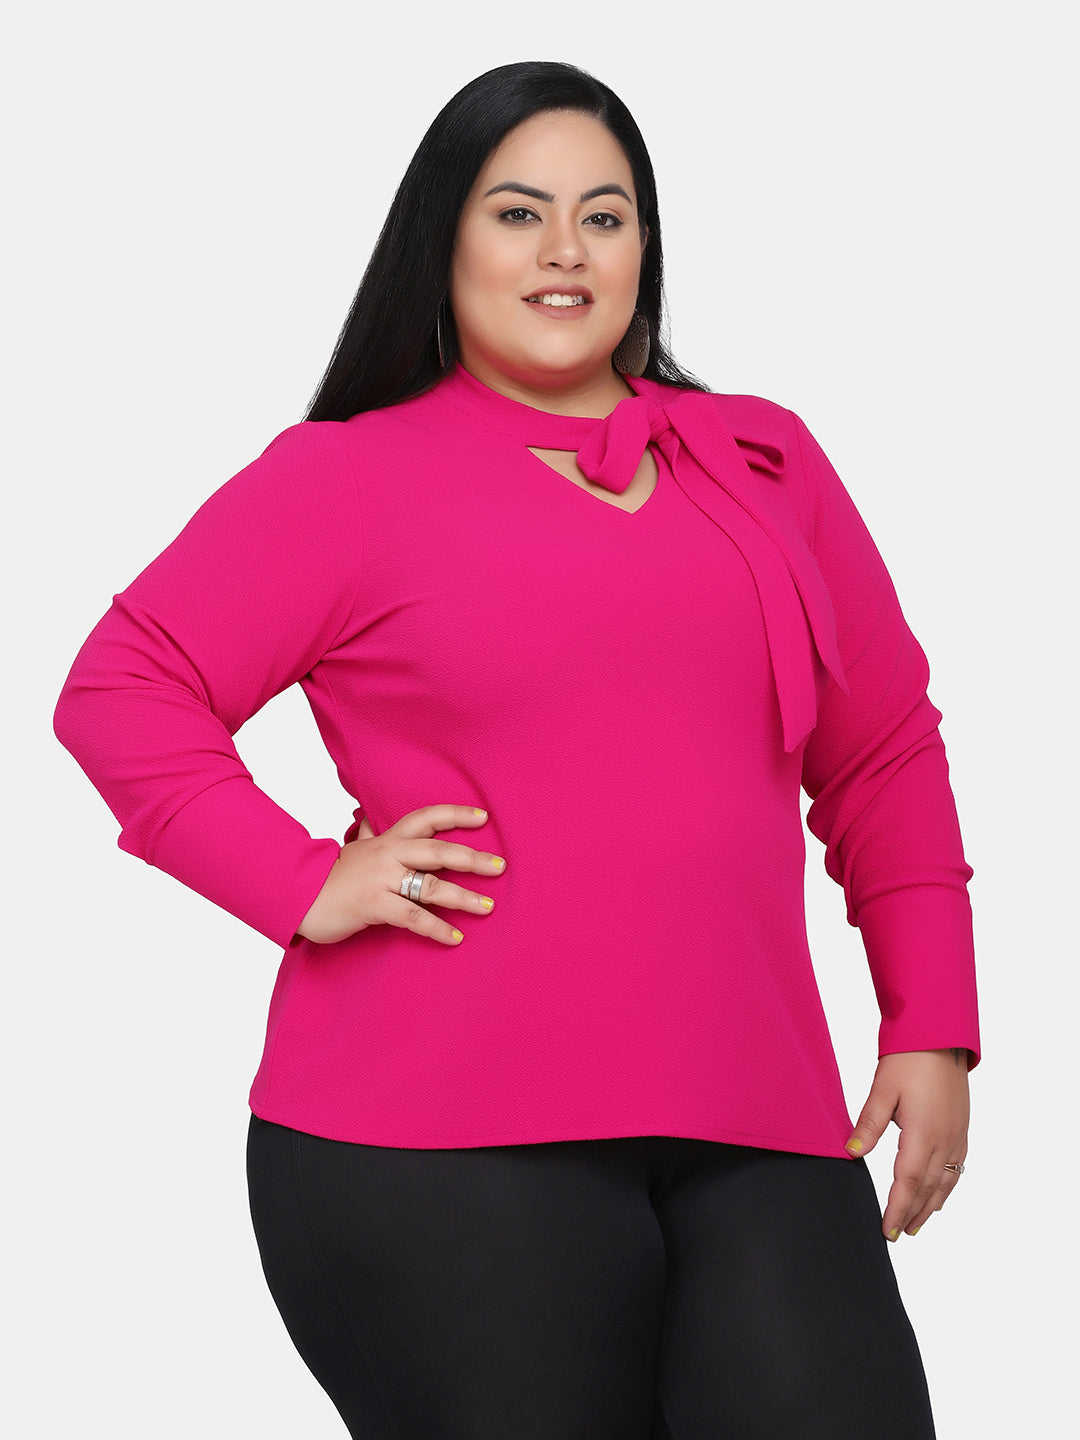 Cut Out V-Neck Stretch Top - Hot Pink